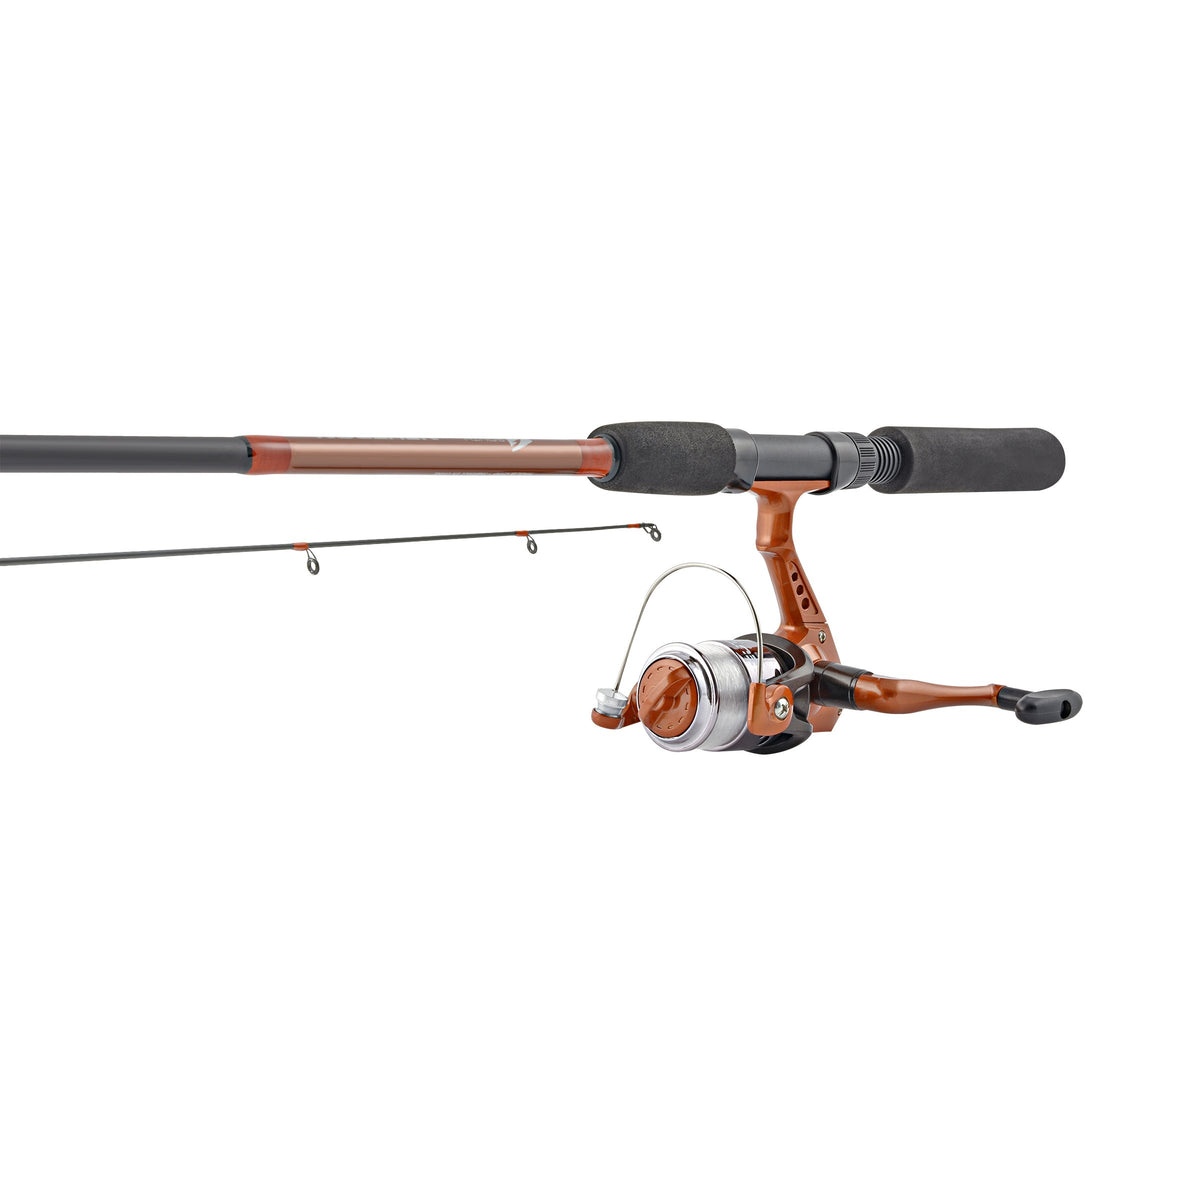 South Bend PROTON PTN-135 6' Combo Reel Two (2)-Piece Fishing rod